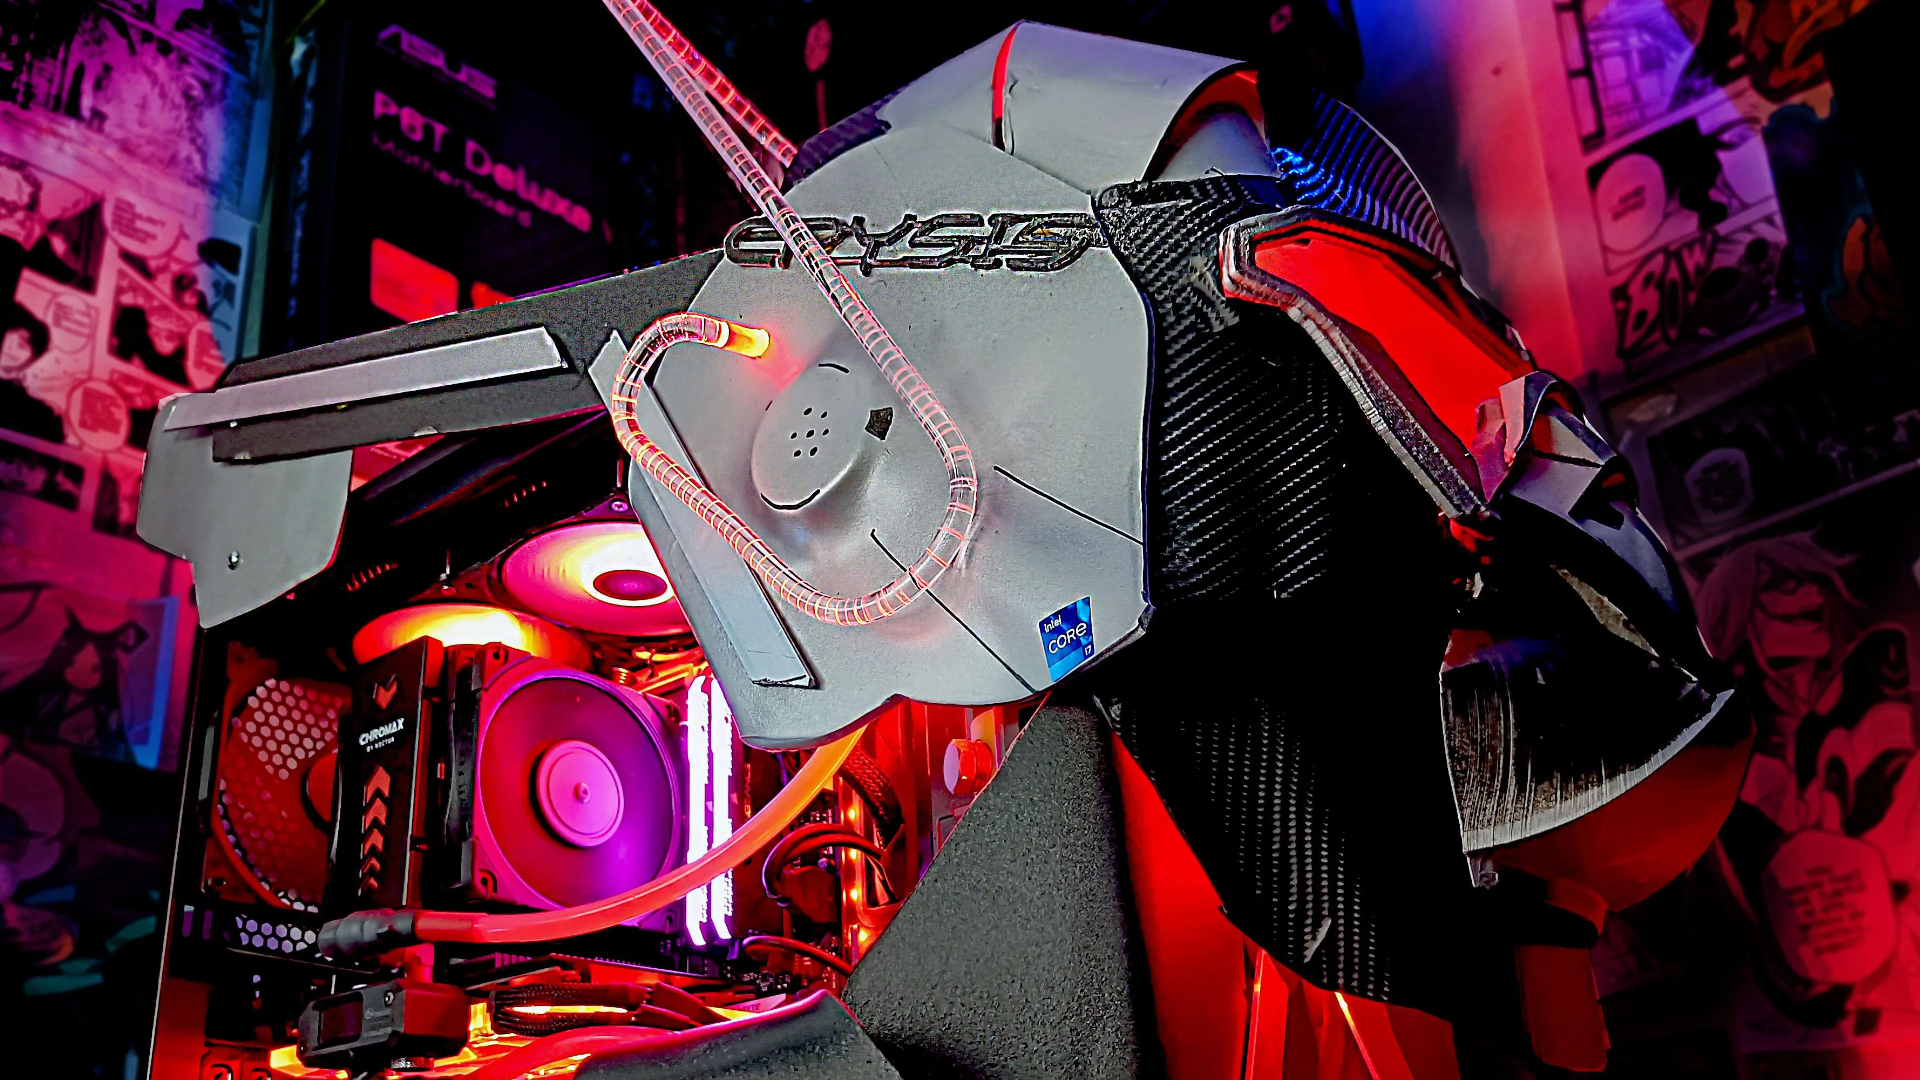 Can it run Crysis? You bet this RTX 3090 Crysis gaming PC can